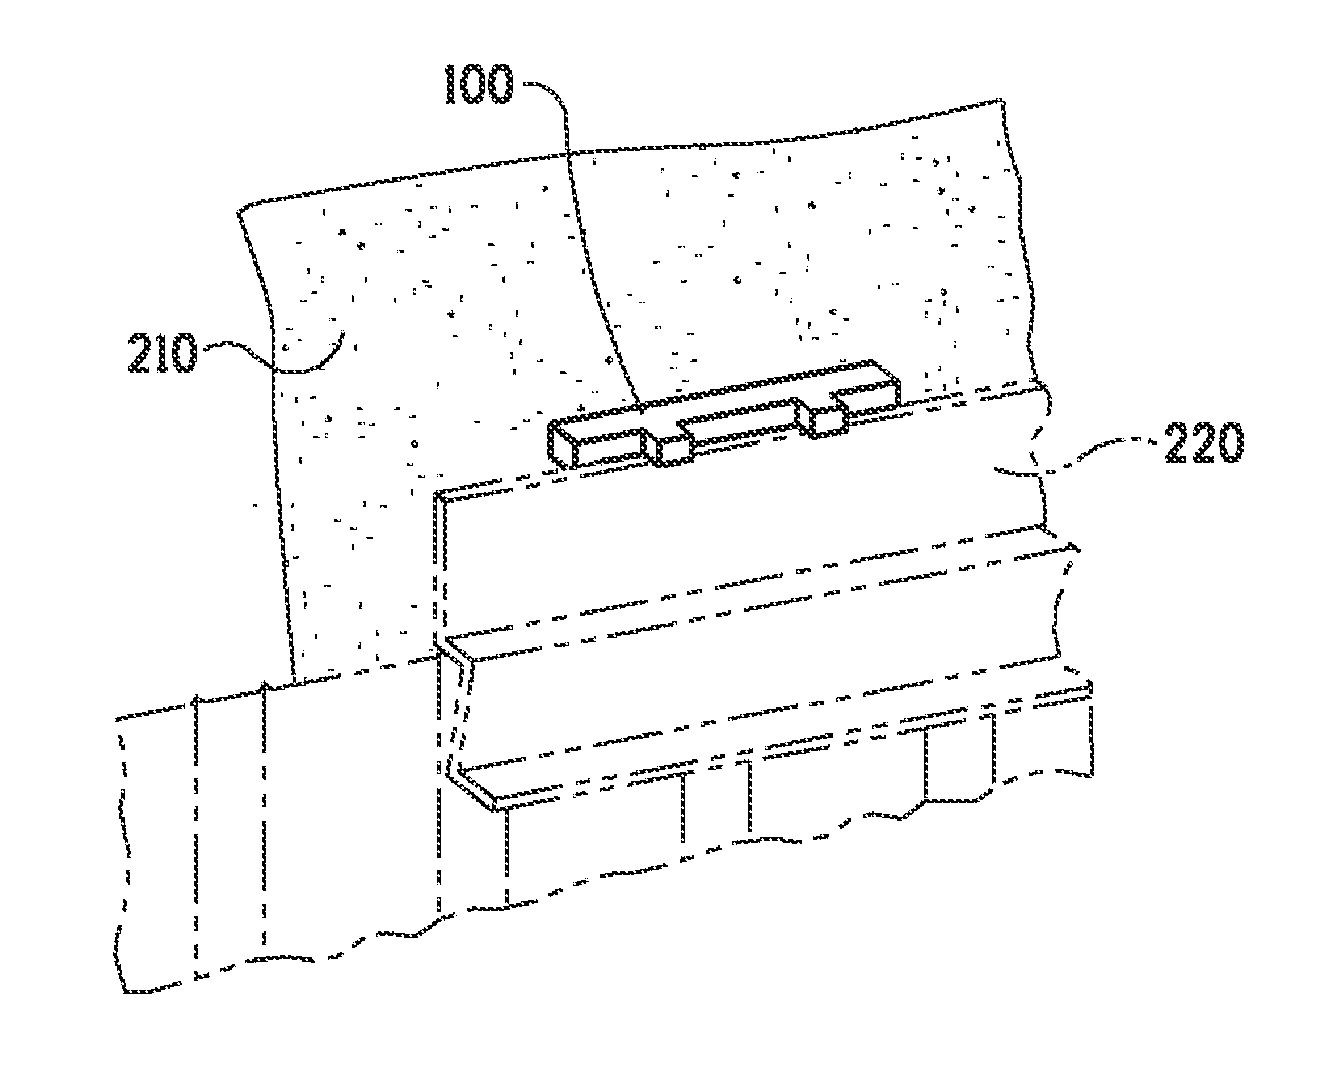 Device for controlling the spacing between siding materials and compressible insulation materials